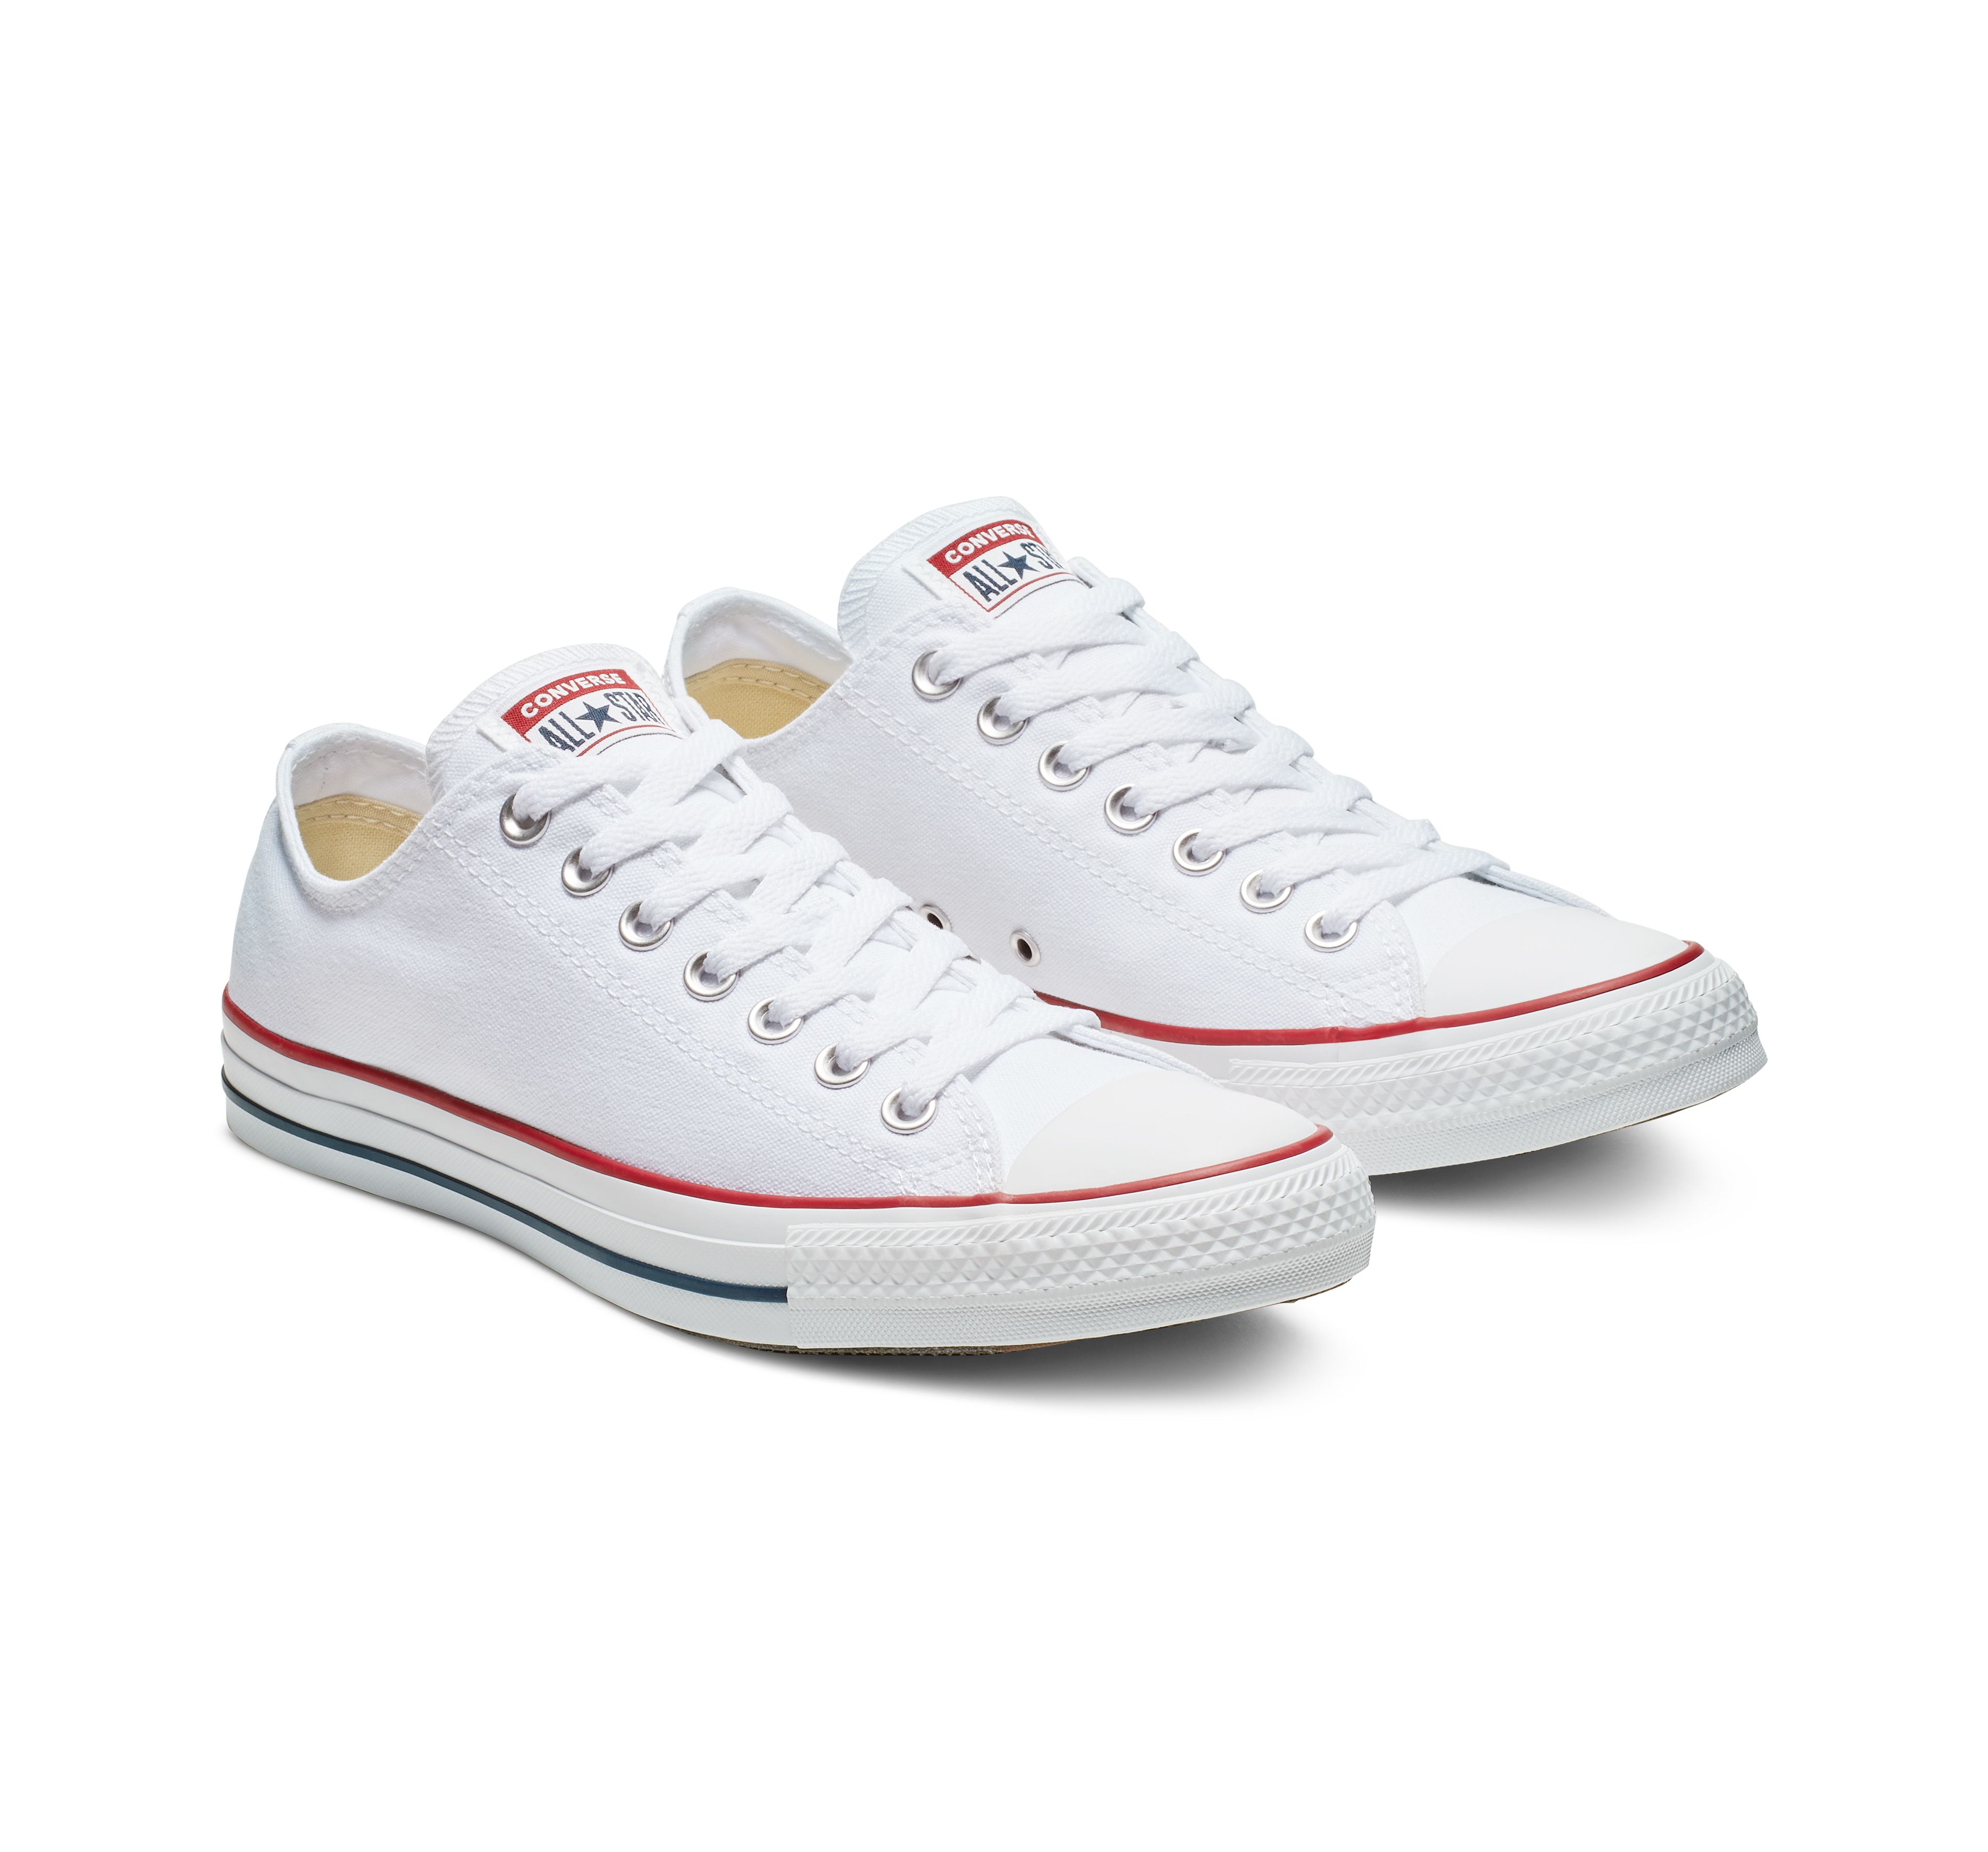 CONVERSE CHUCK taylorˉ ALL STAR - OX - OPTICAL WHITE - 19165 - M7652C Men  and women couple white shoes canvas shoes | Lazada PH